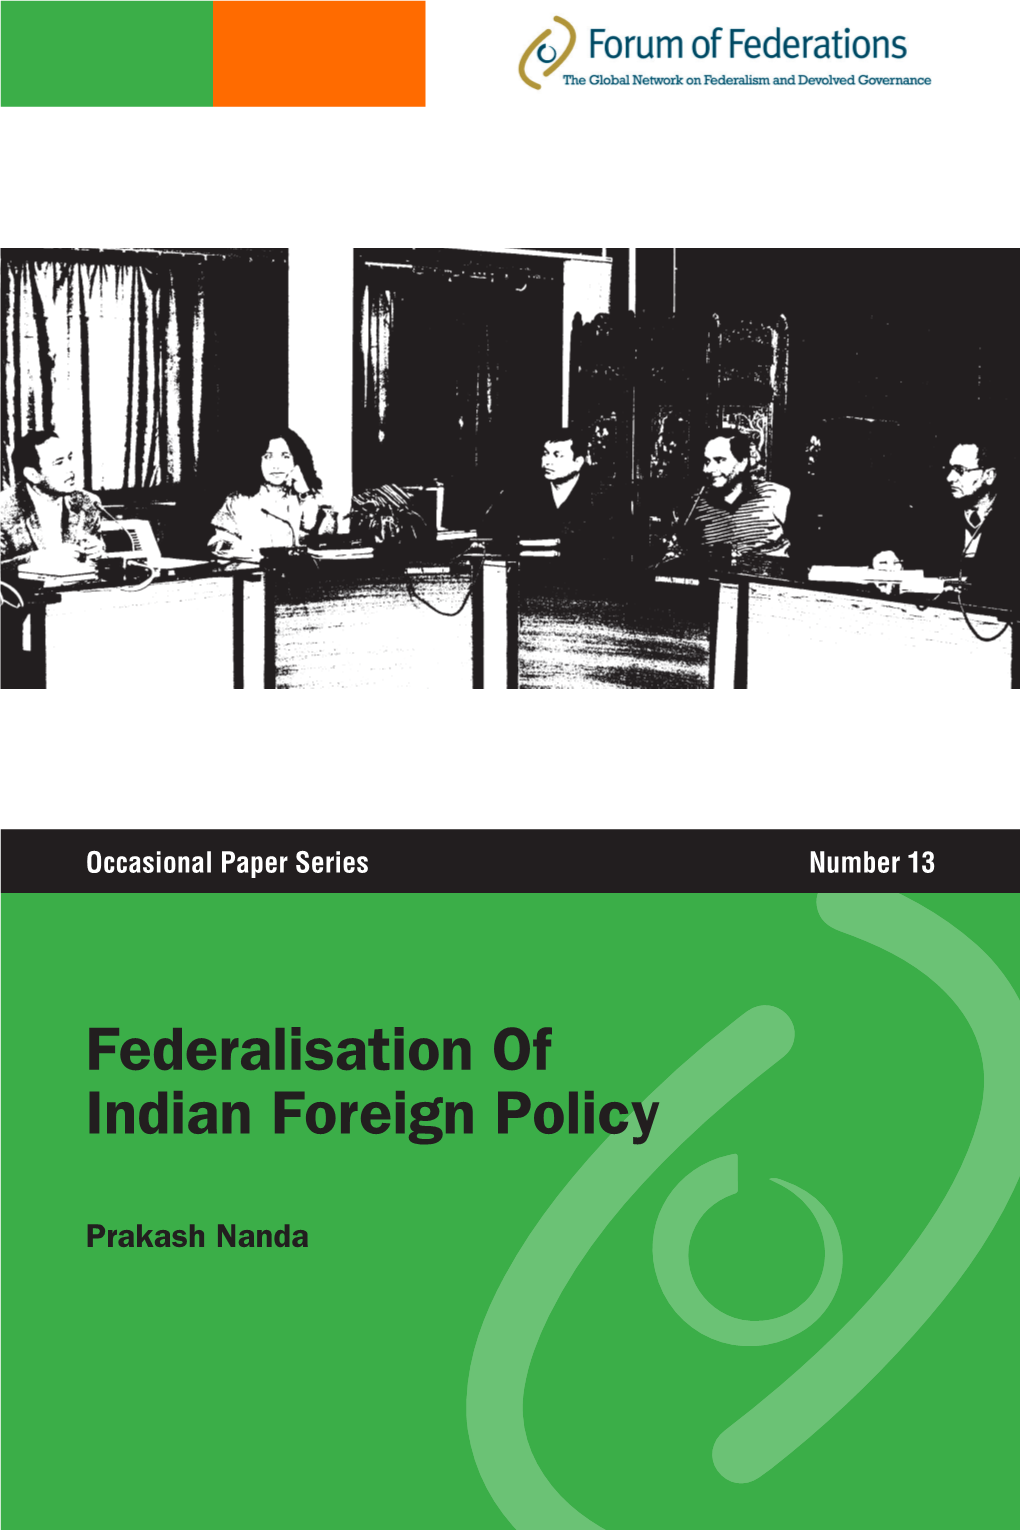 Federalisation of Indian Foreign Policy